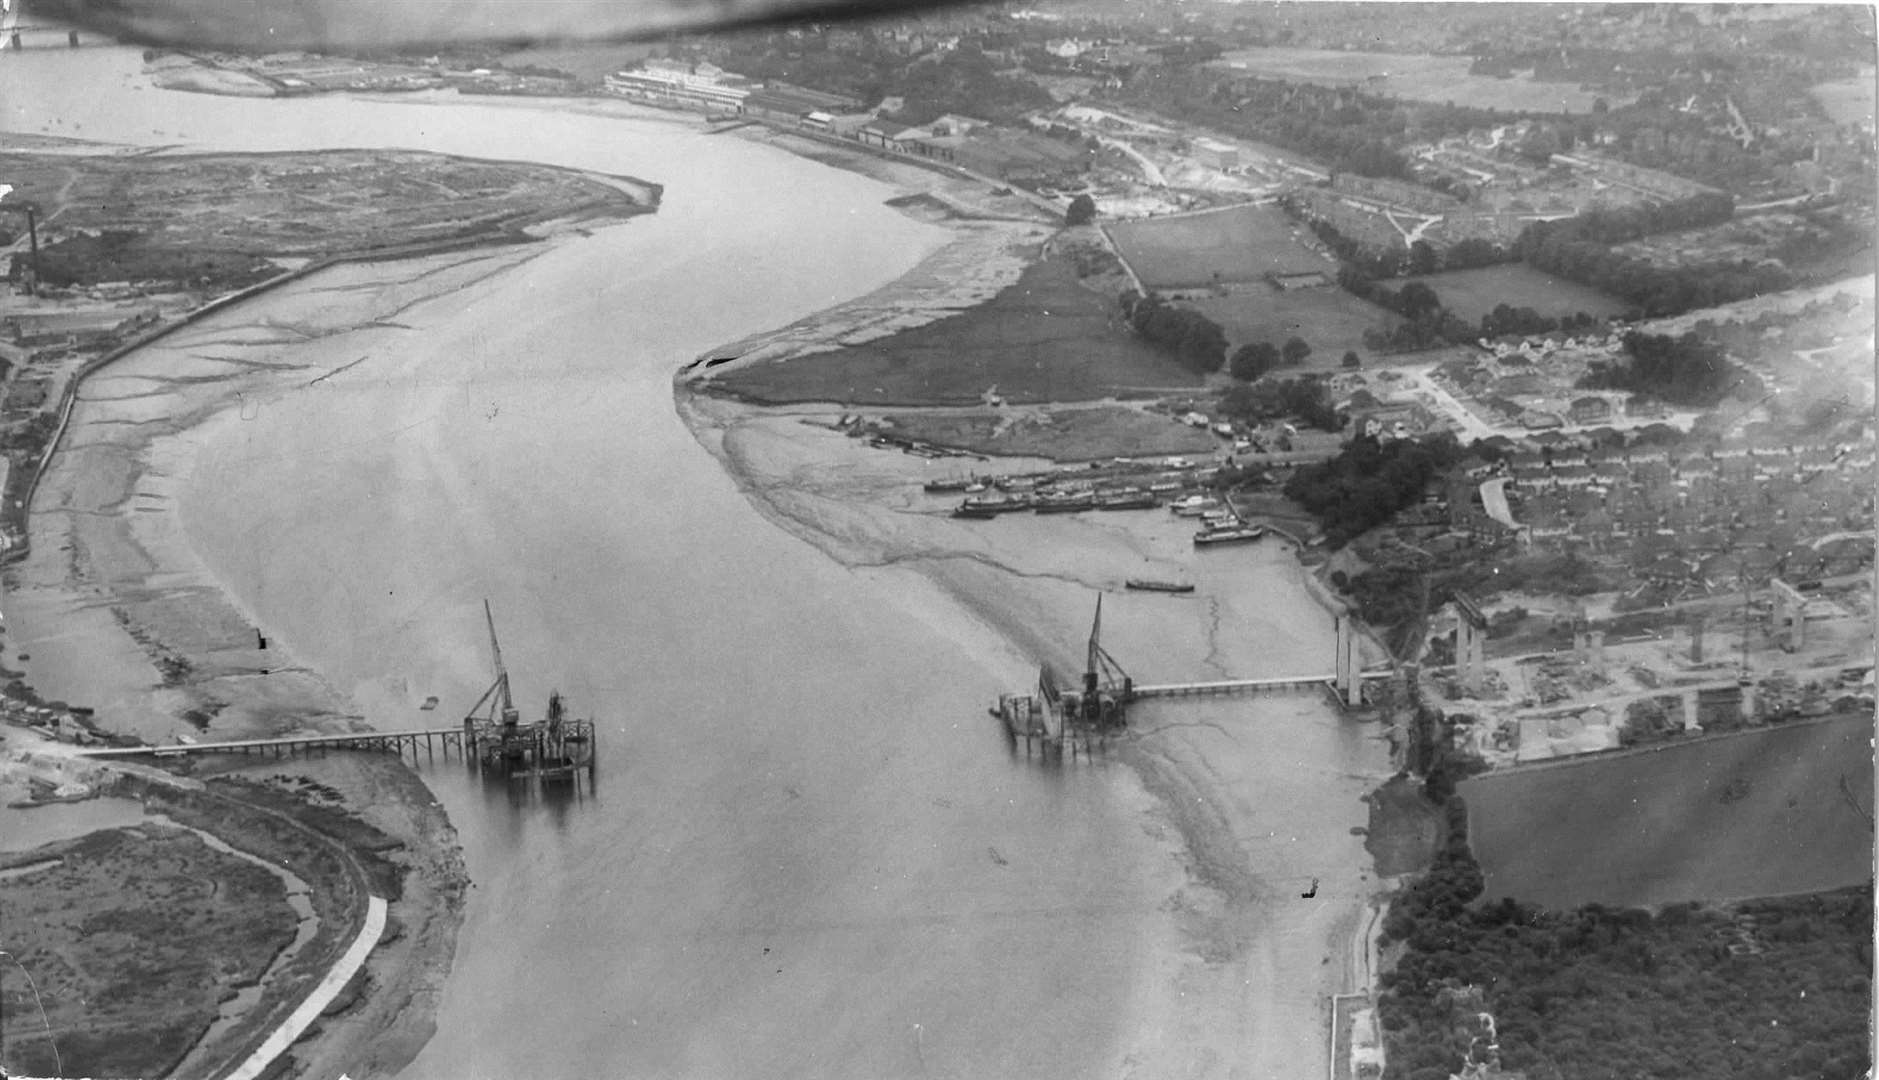 A 1961 shot of the site where the Medway Bridge now stands, but minus the bridge. The cranes positioned on each bank will soon bridge the gap and become part of the M2